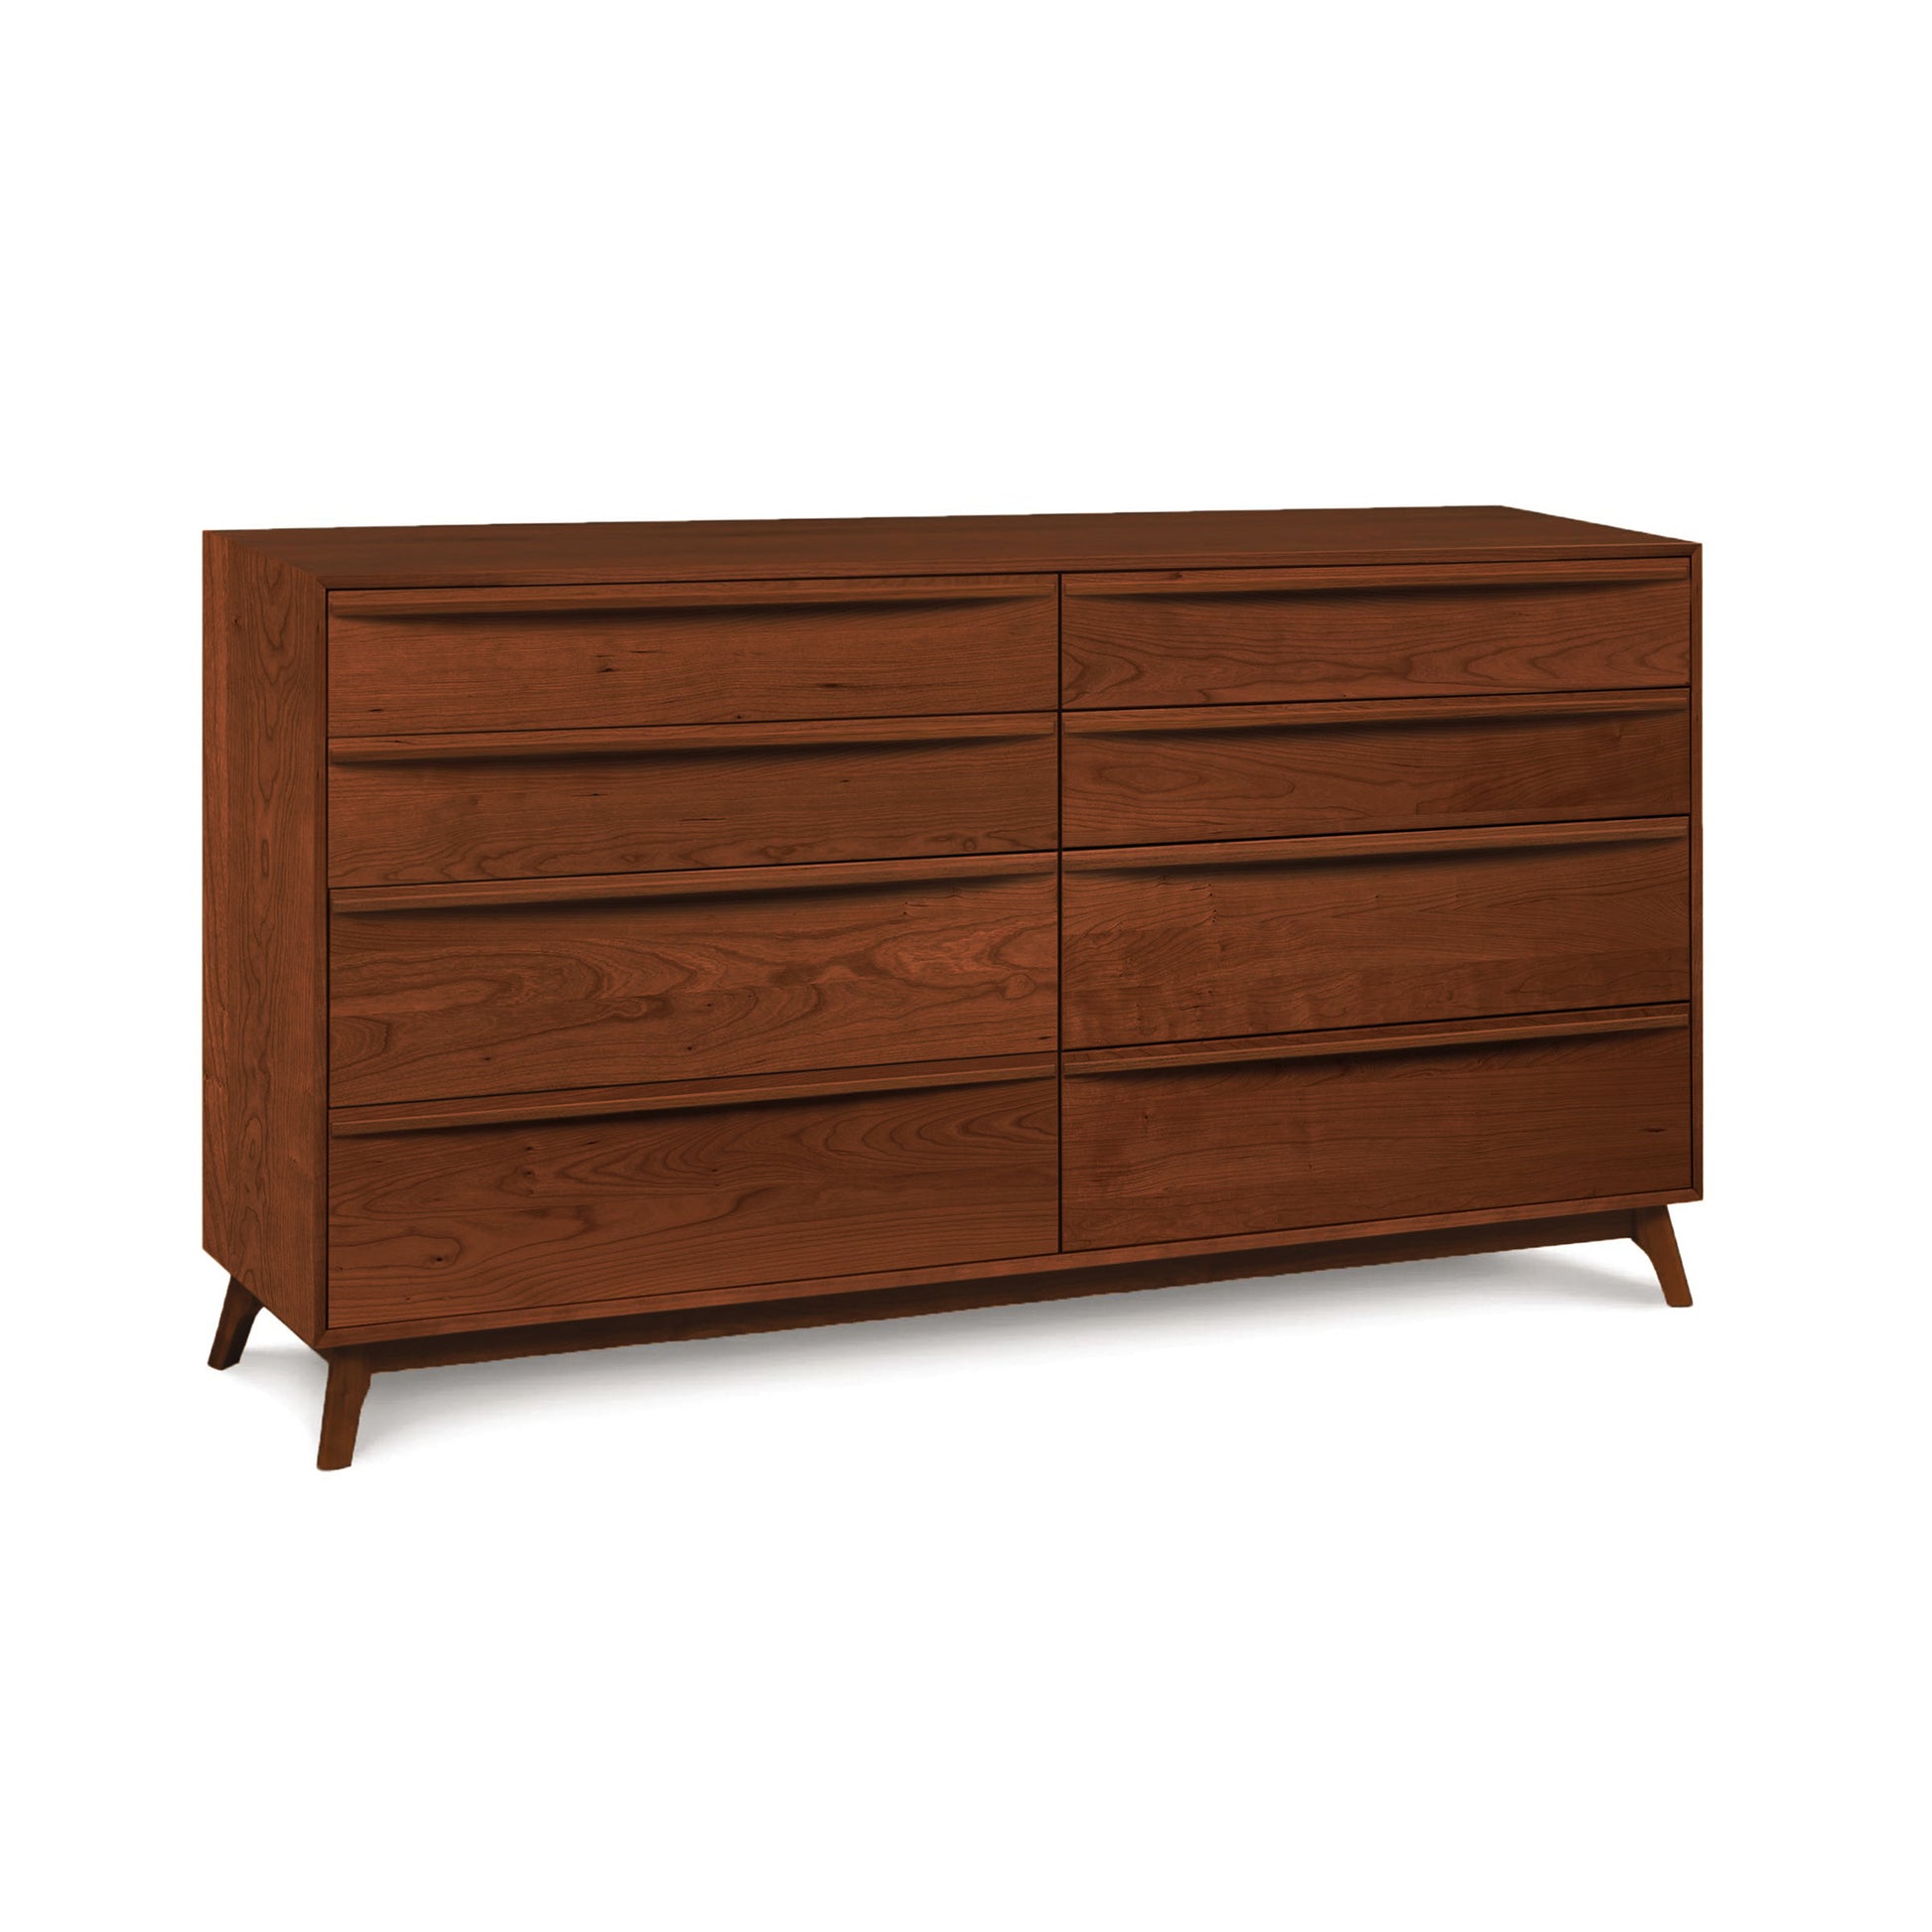 Copeland Furniture's Catalina 8-drawer dresser with angled legs on a white background, featuring solid hardwood construction.